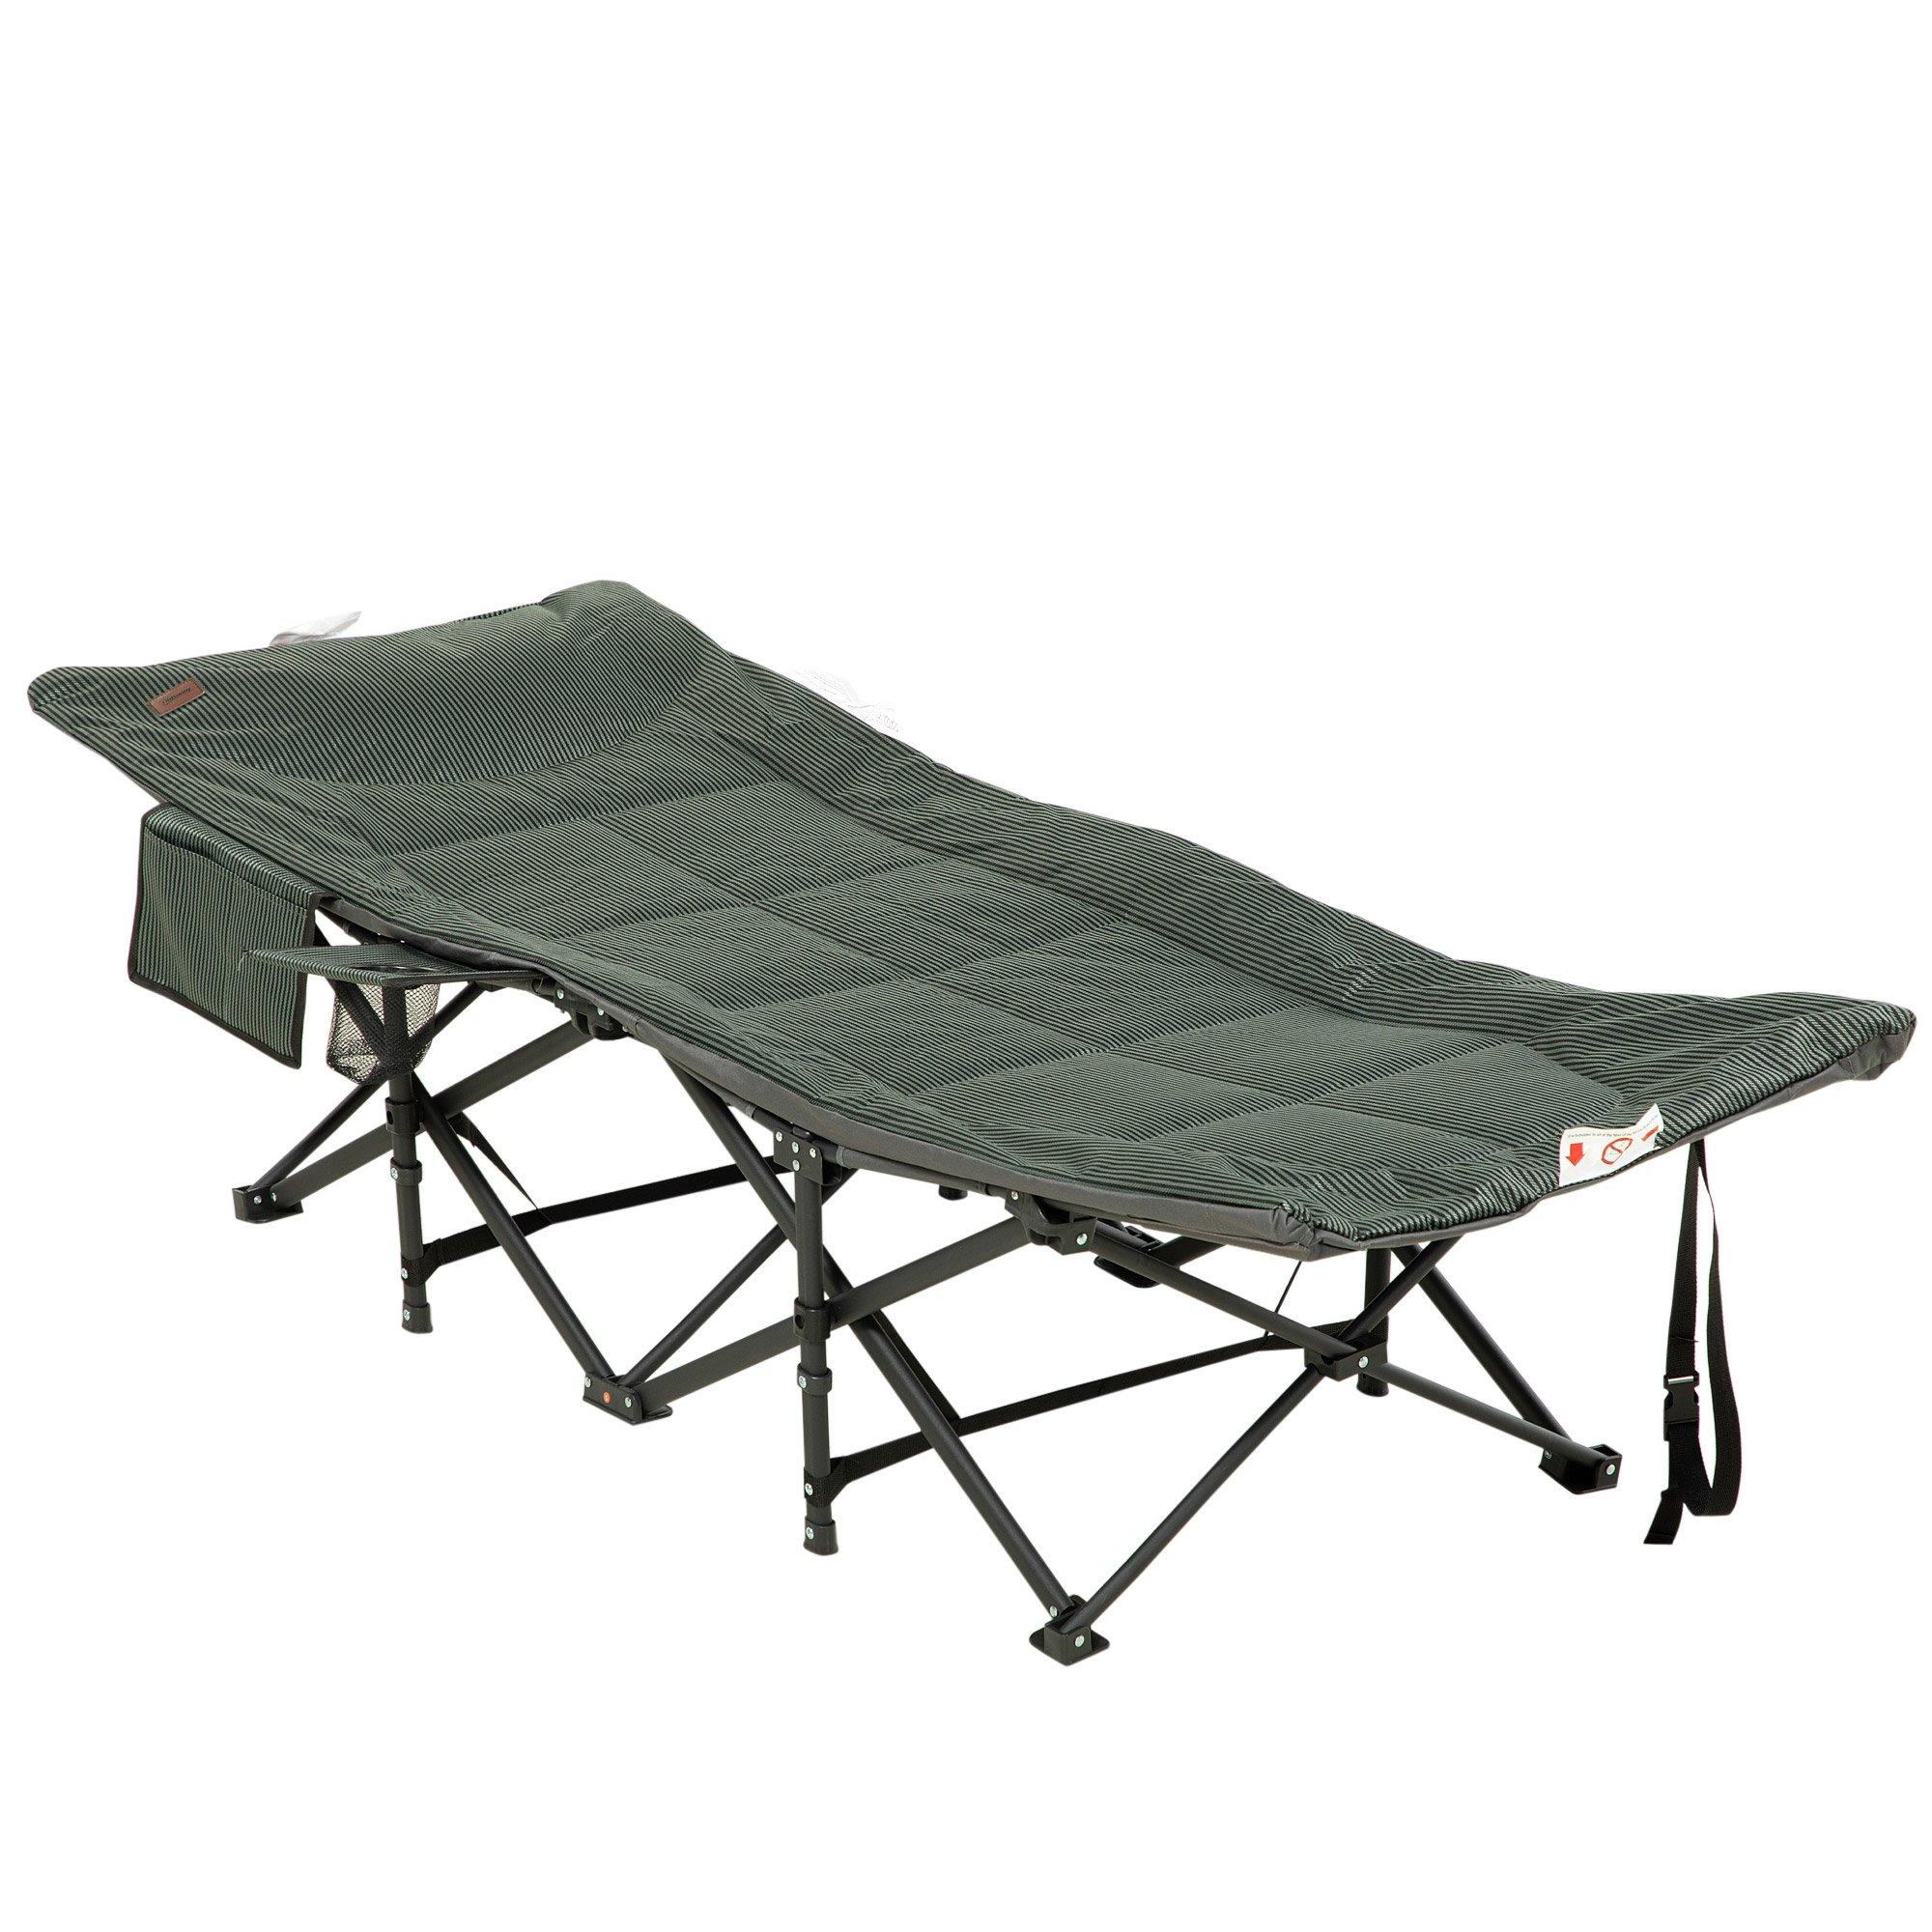 Foldable Camping Bed w/ Soft Padding, Carry Bag, Magazine Bag, Cup Holder